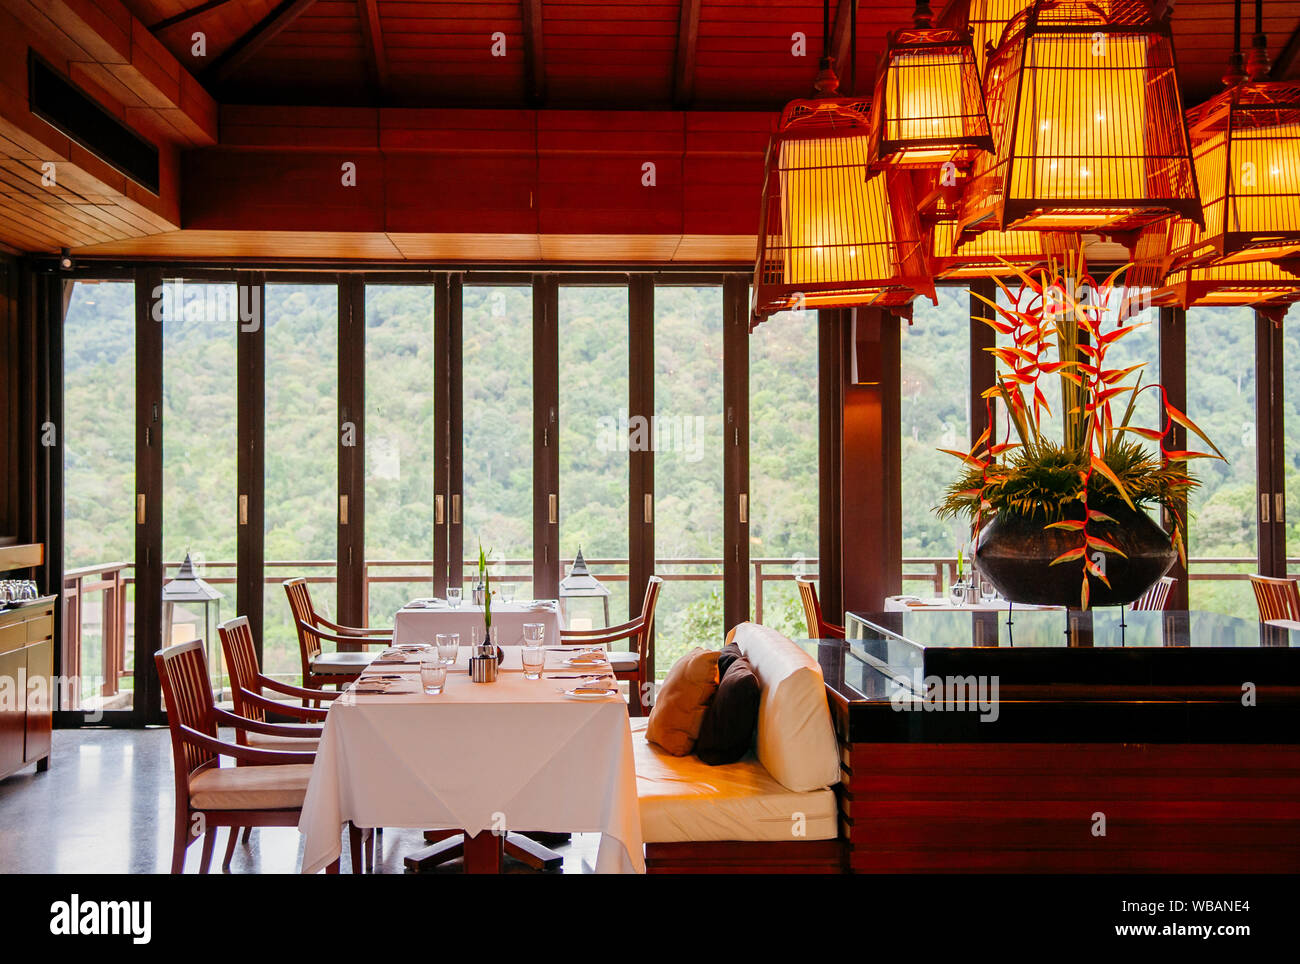 MAY 17, 2014 Krabi, THAILAND - Asian luxury style hotel restaurant with contemporary wooden furnitures, chairs, tables , bird cage pedant lamps decora Stock Photo